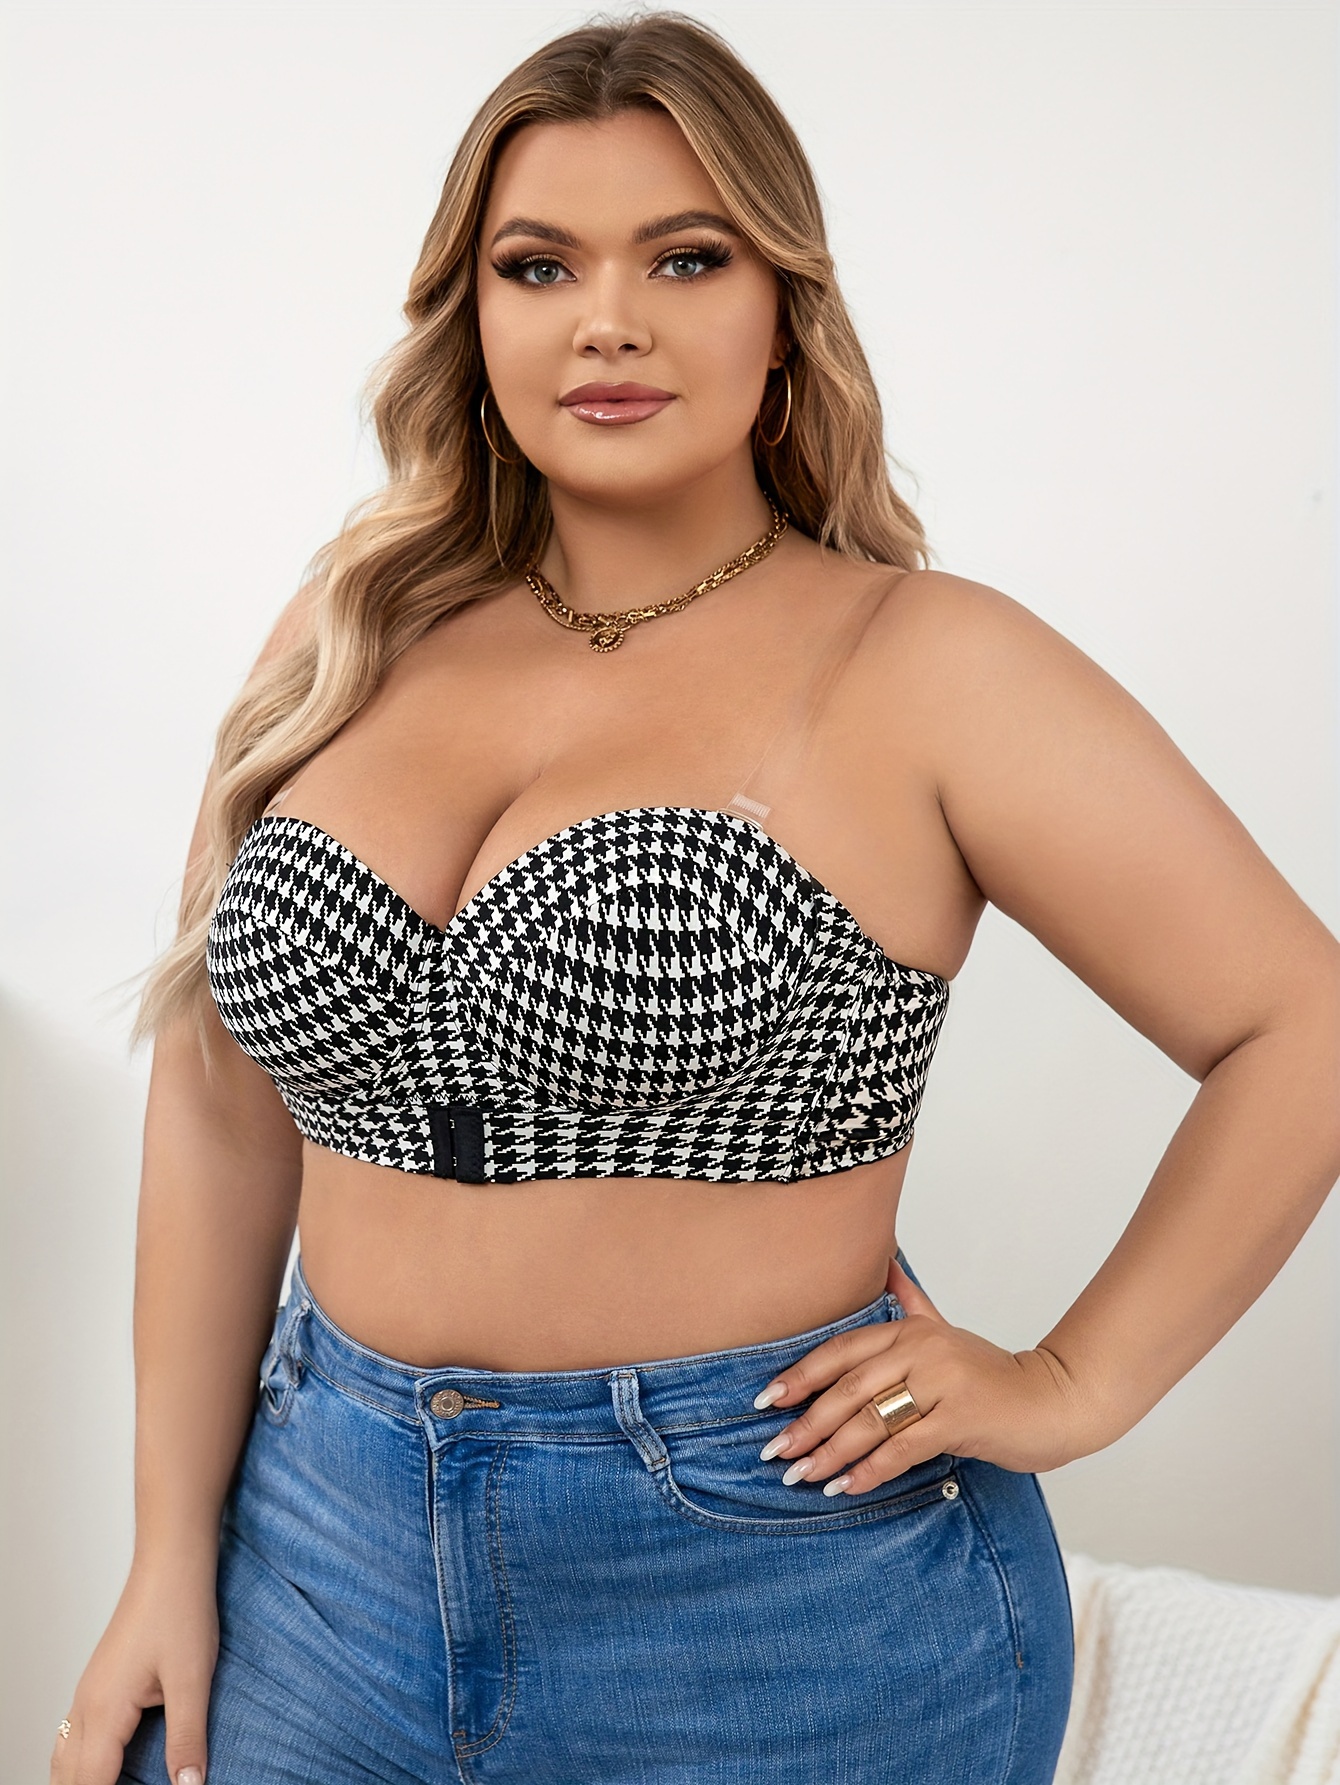 Women's Elegant Bra, Plus Size Houndstooth Print Buckle Front Push Up Bra  With Translucent Straps